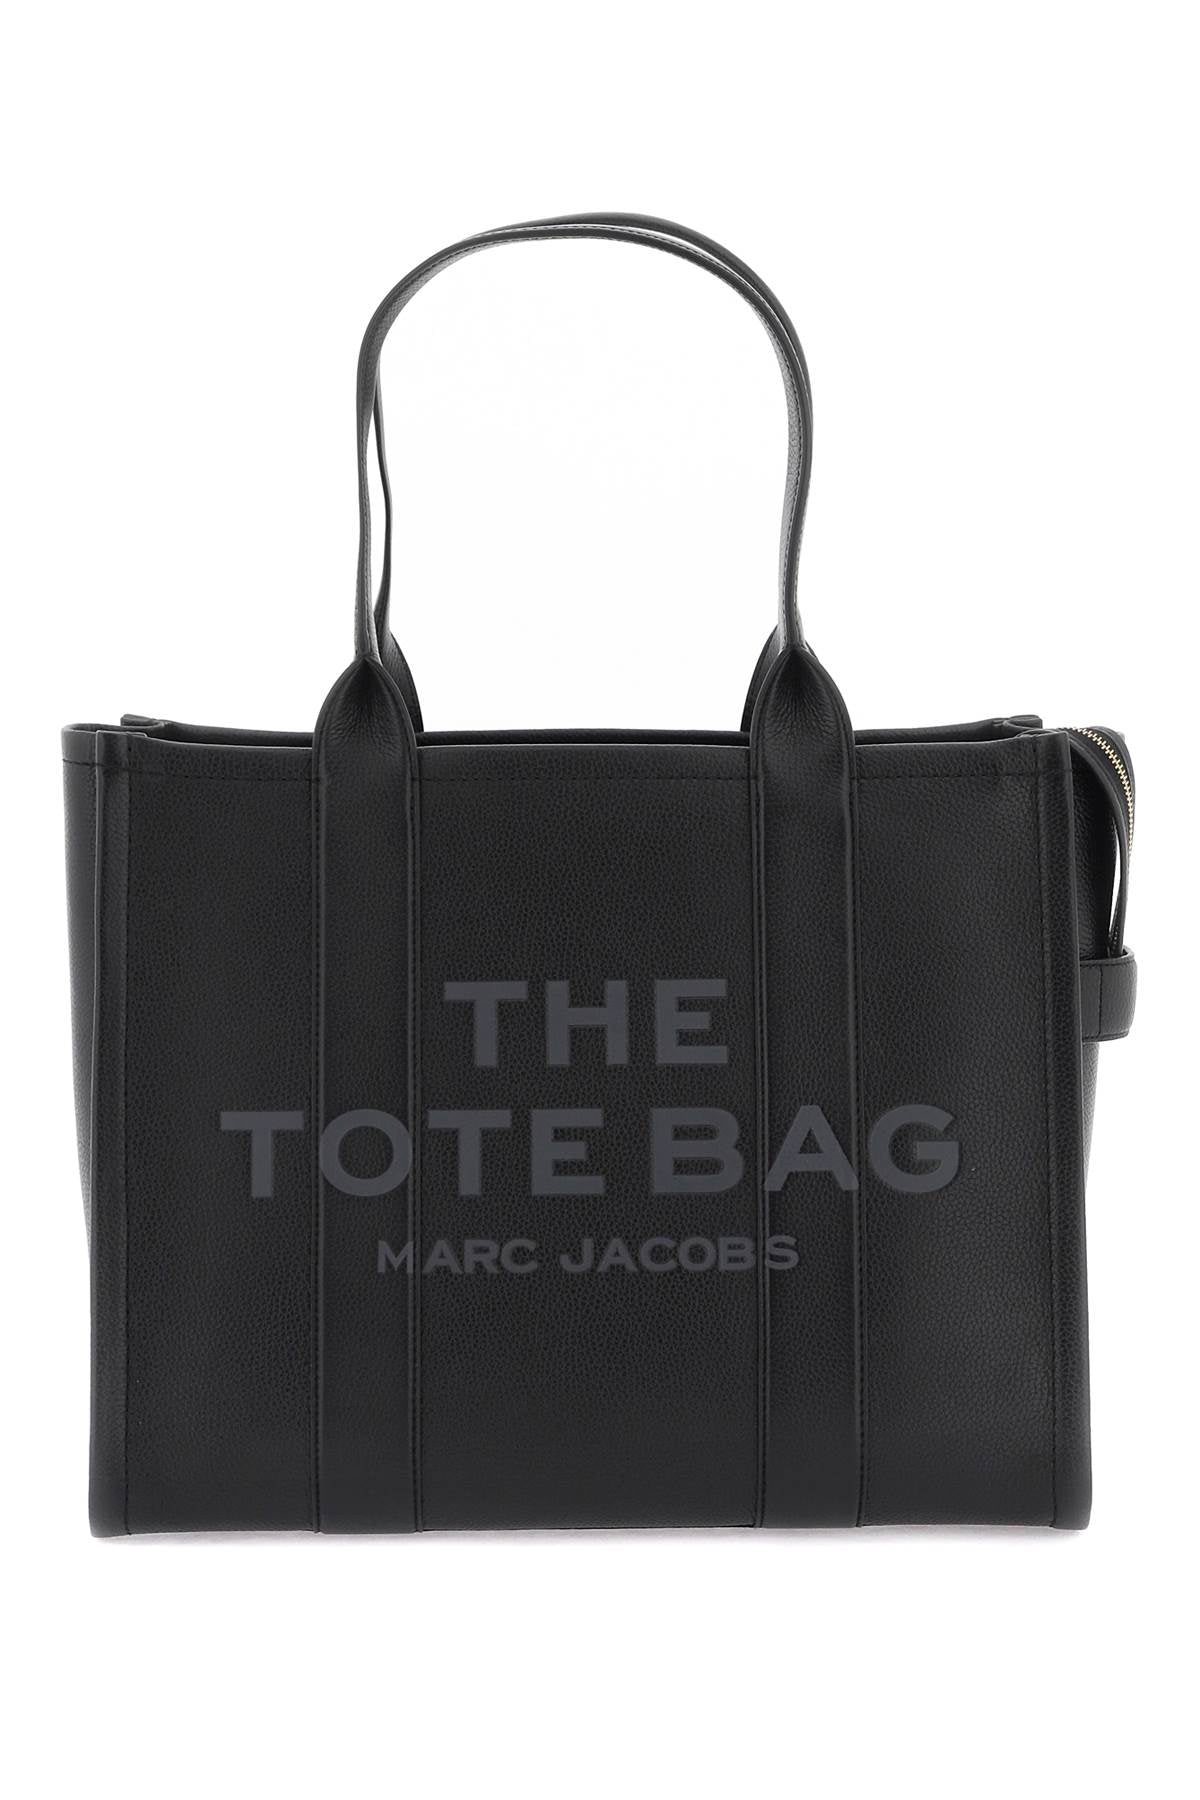 Marc Jacobs The Leather Large Tote Bag Black